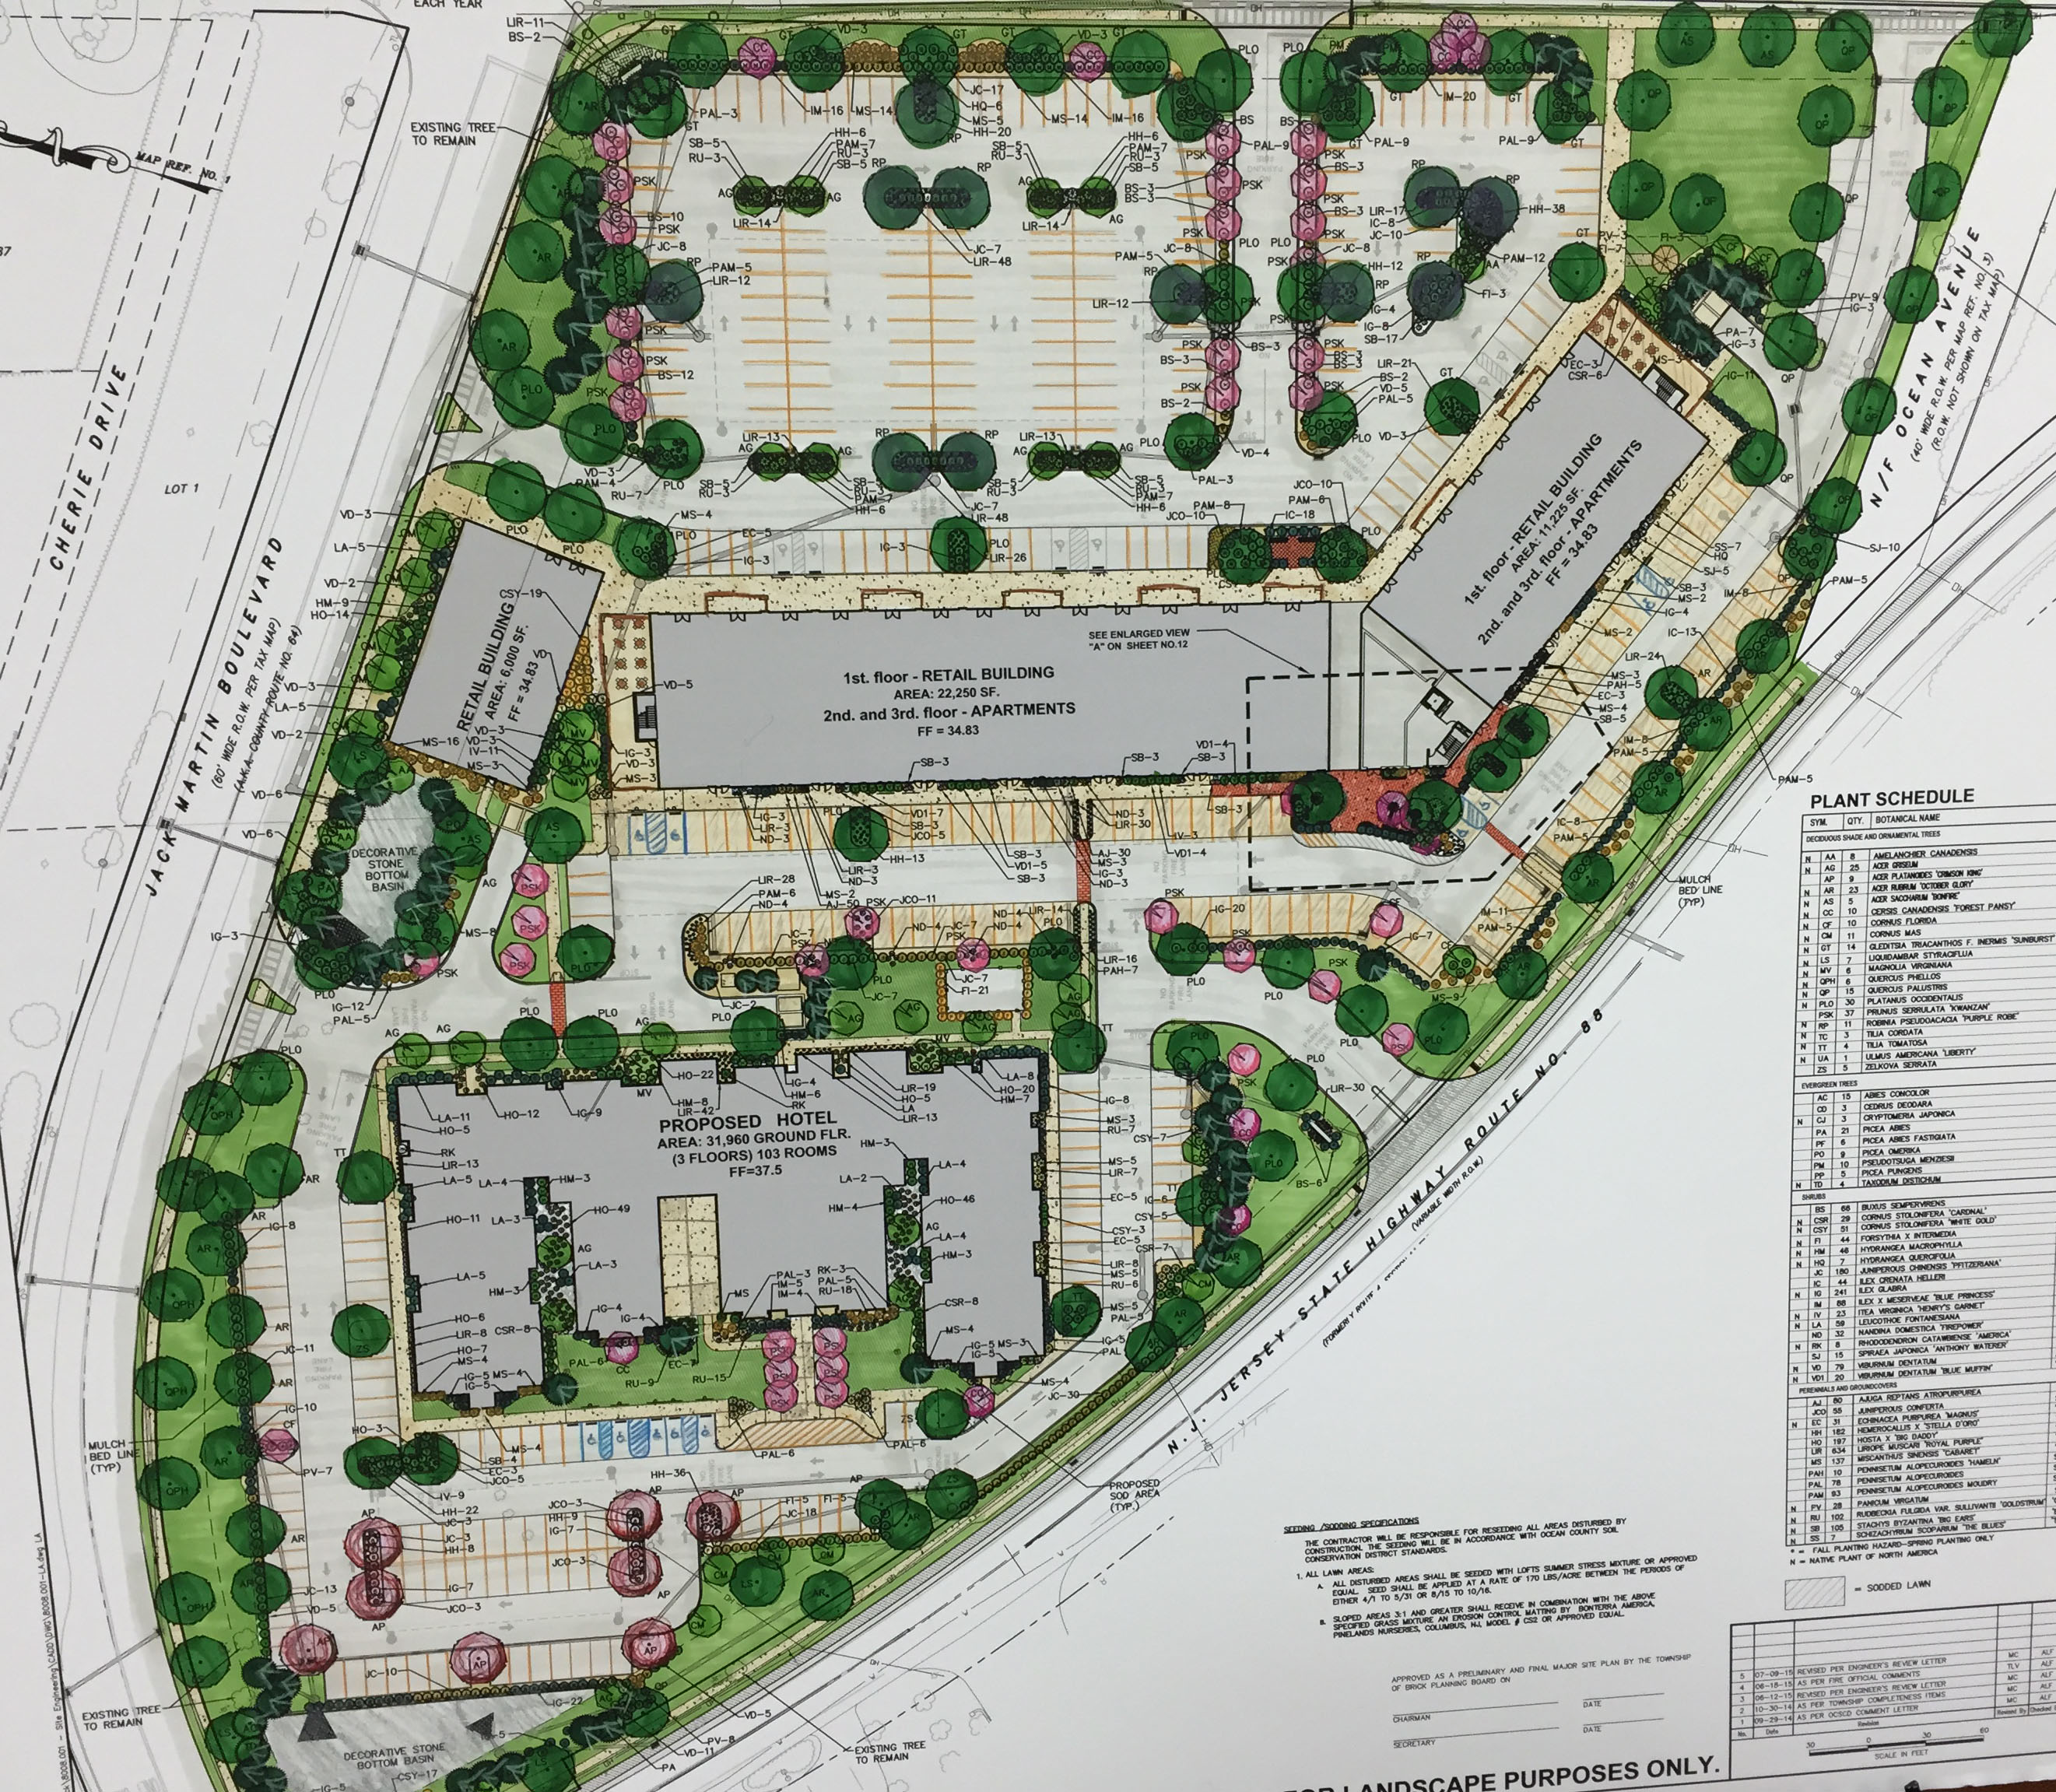 Proposed 103 Room Hotel Retail And Apartment Complex Draws Ire Of Neighbors Brick Nj Shorebeat News Real Estate Events Community Sports Business